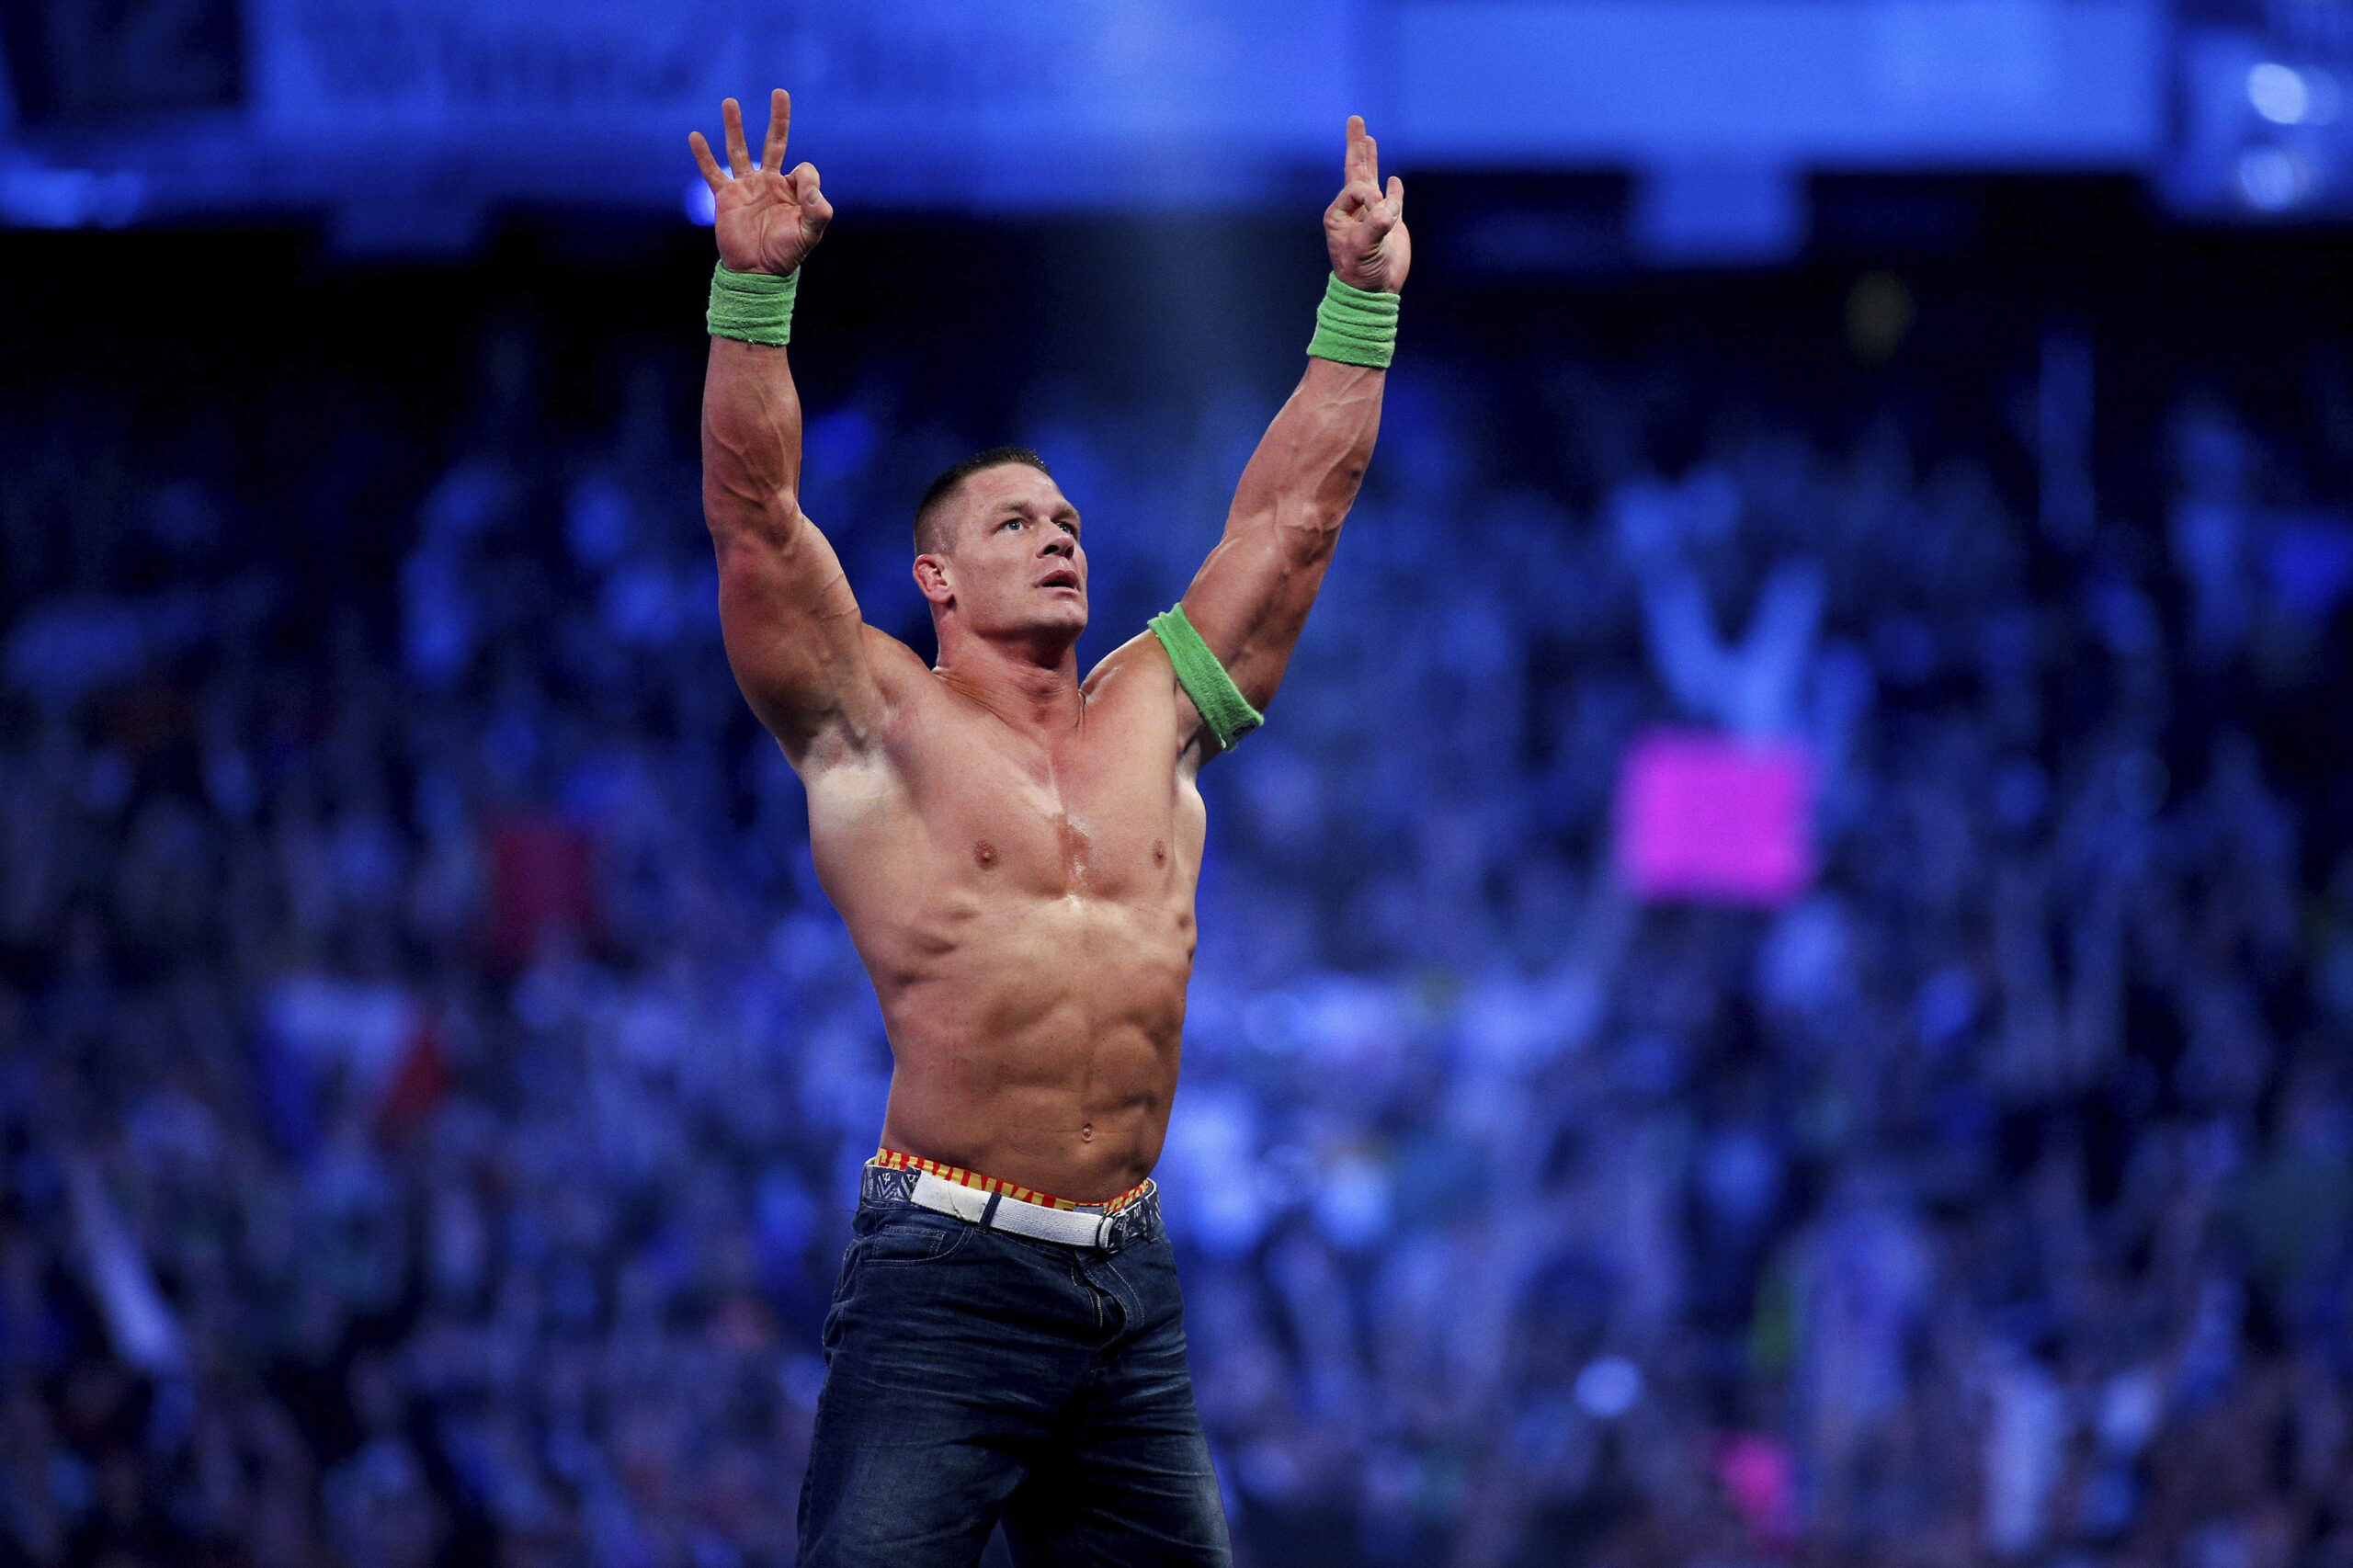 Did John Cena, the WWE Superstar, Ever Consider Playing in the NFL?